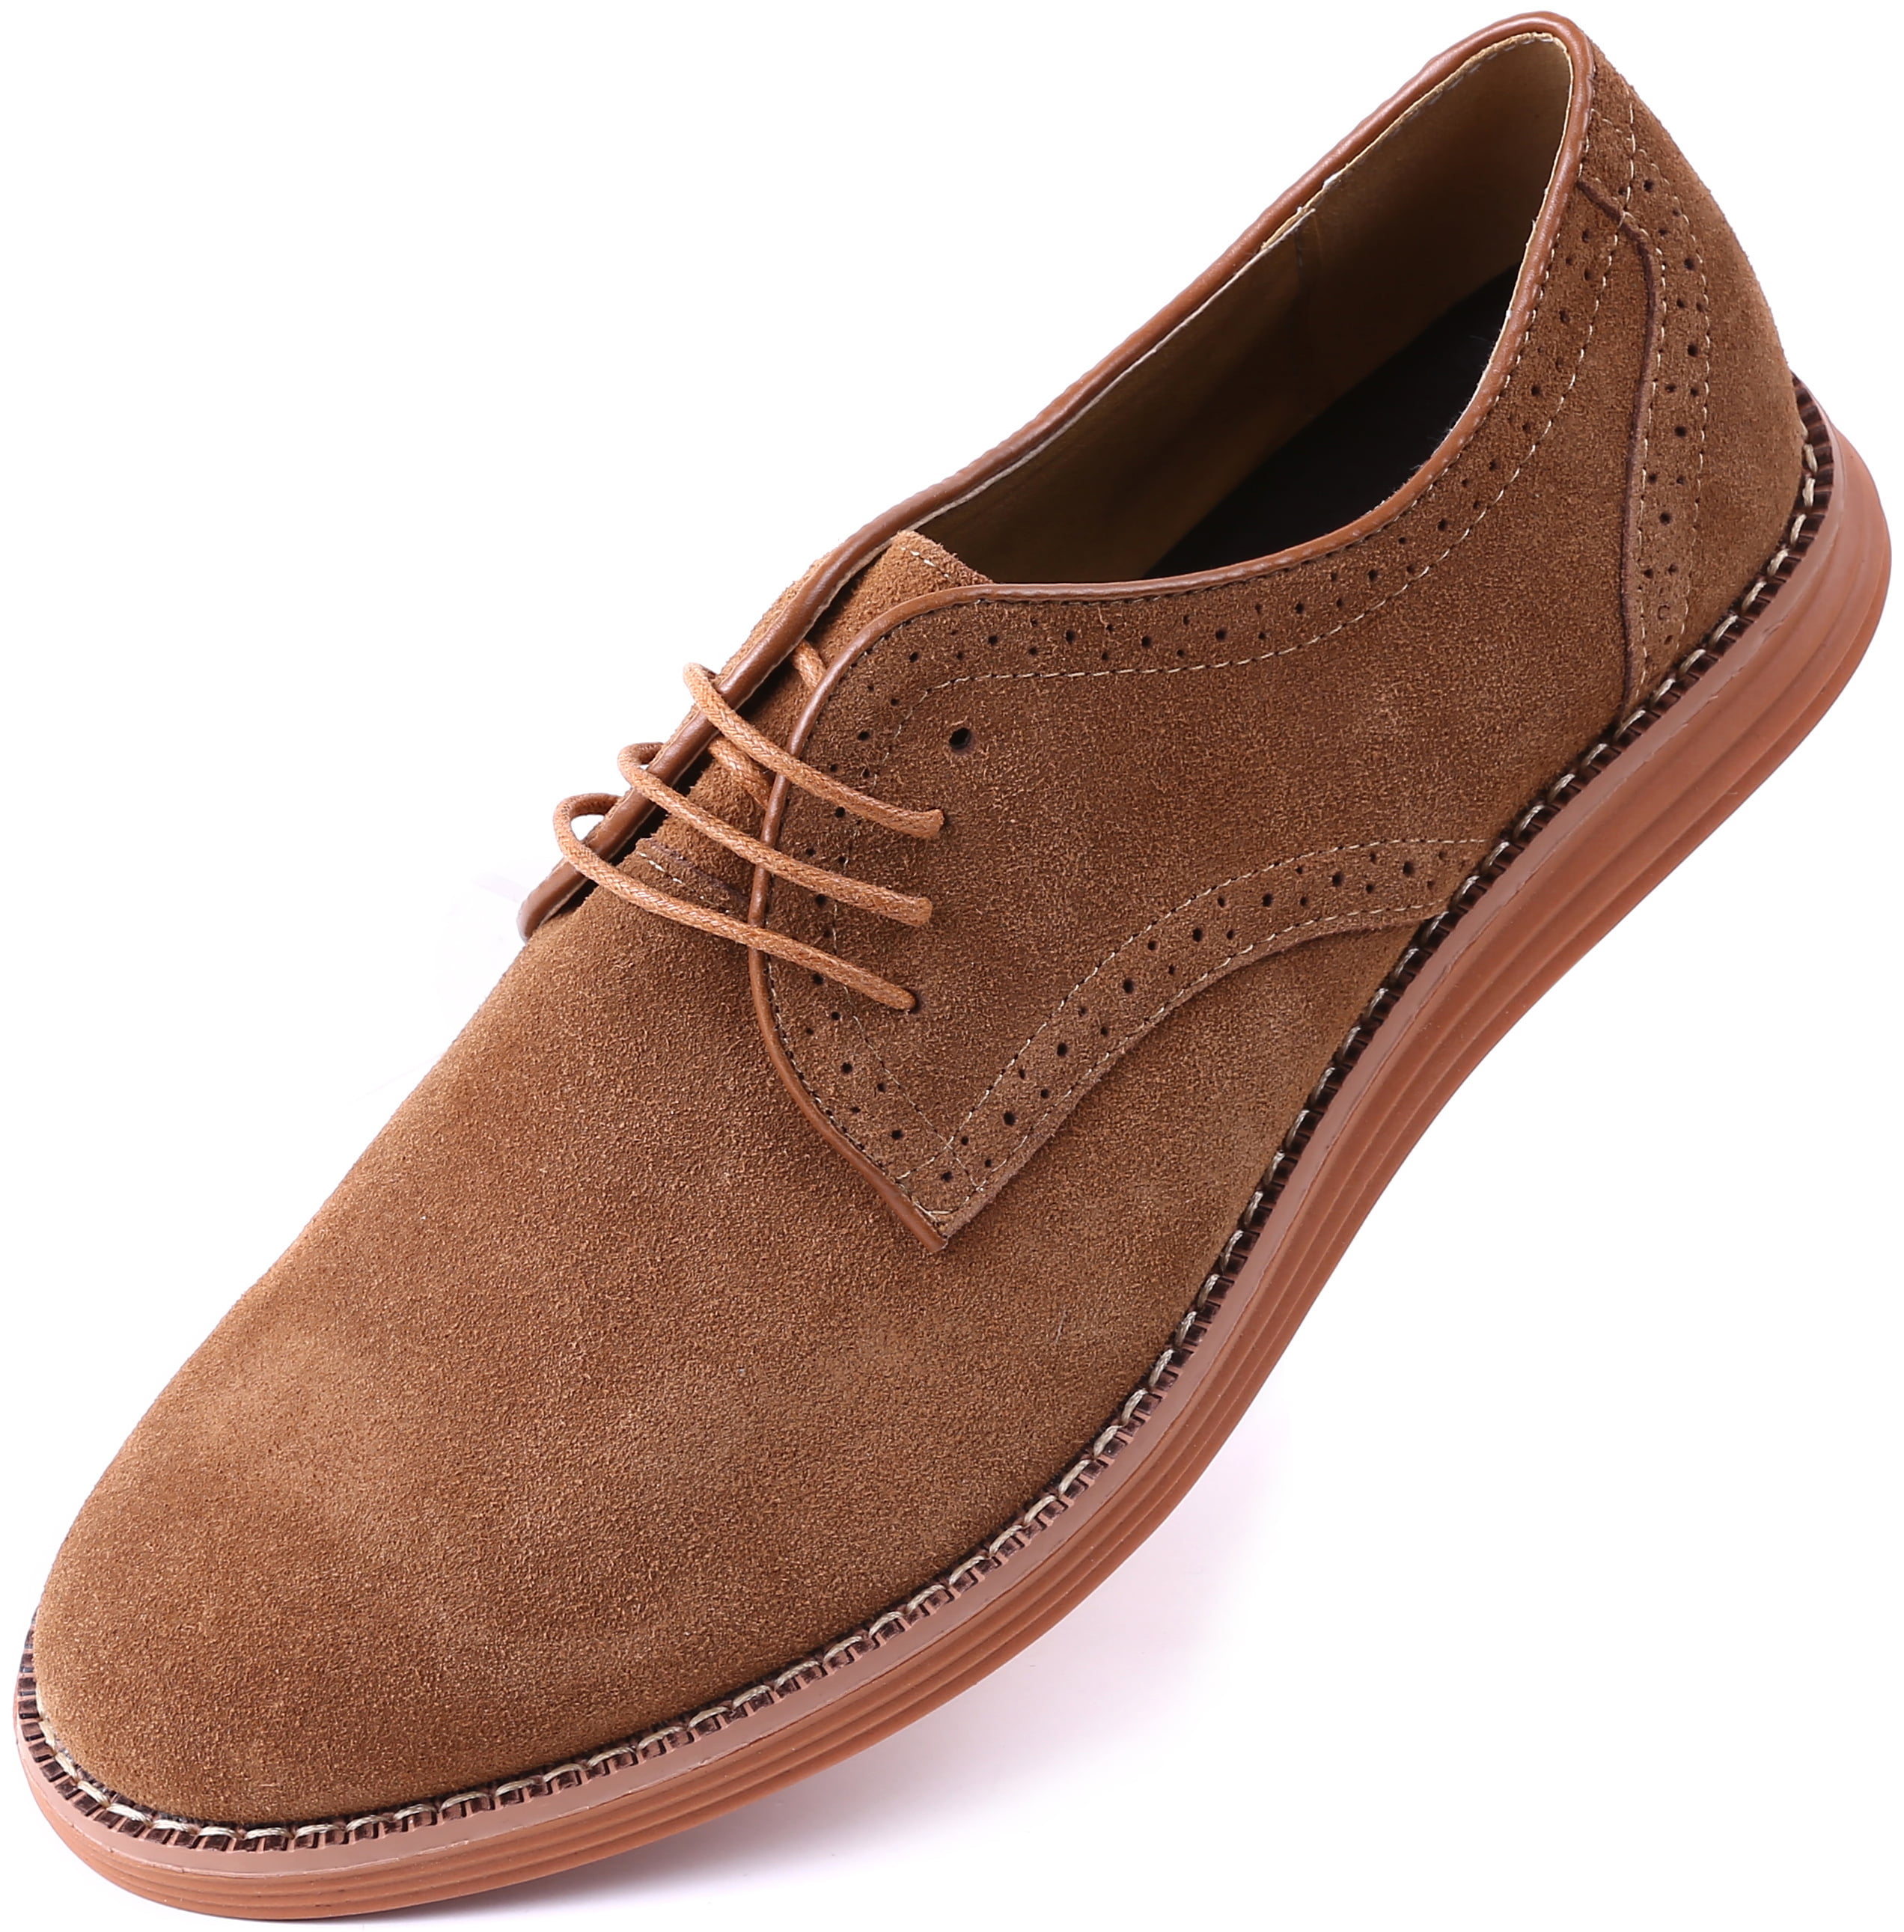 Marino Suede Oxford Dress Shoes for Men 